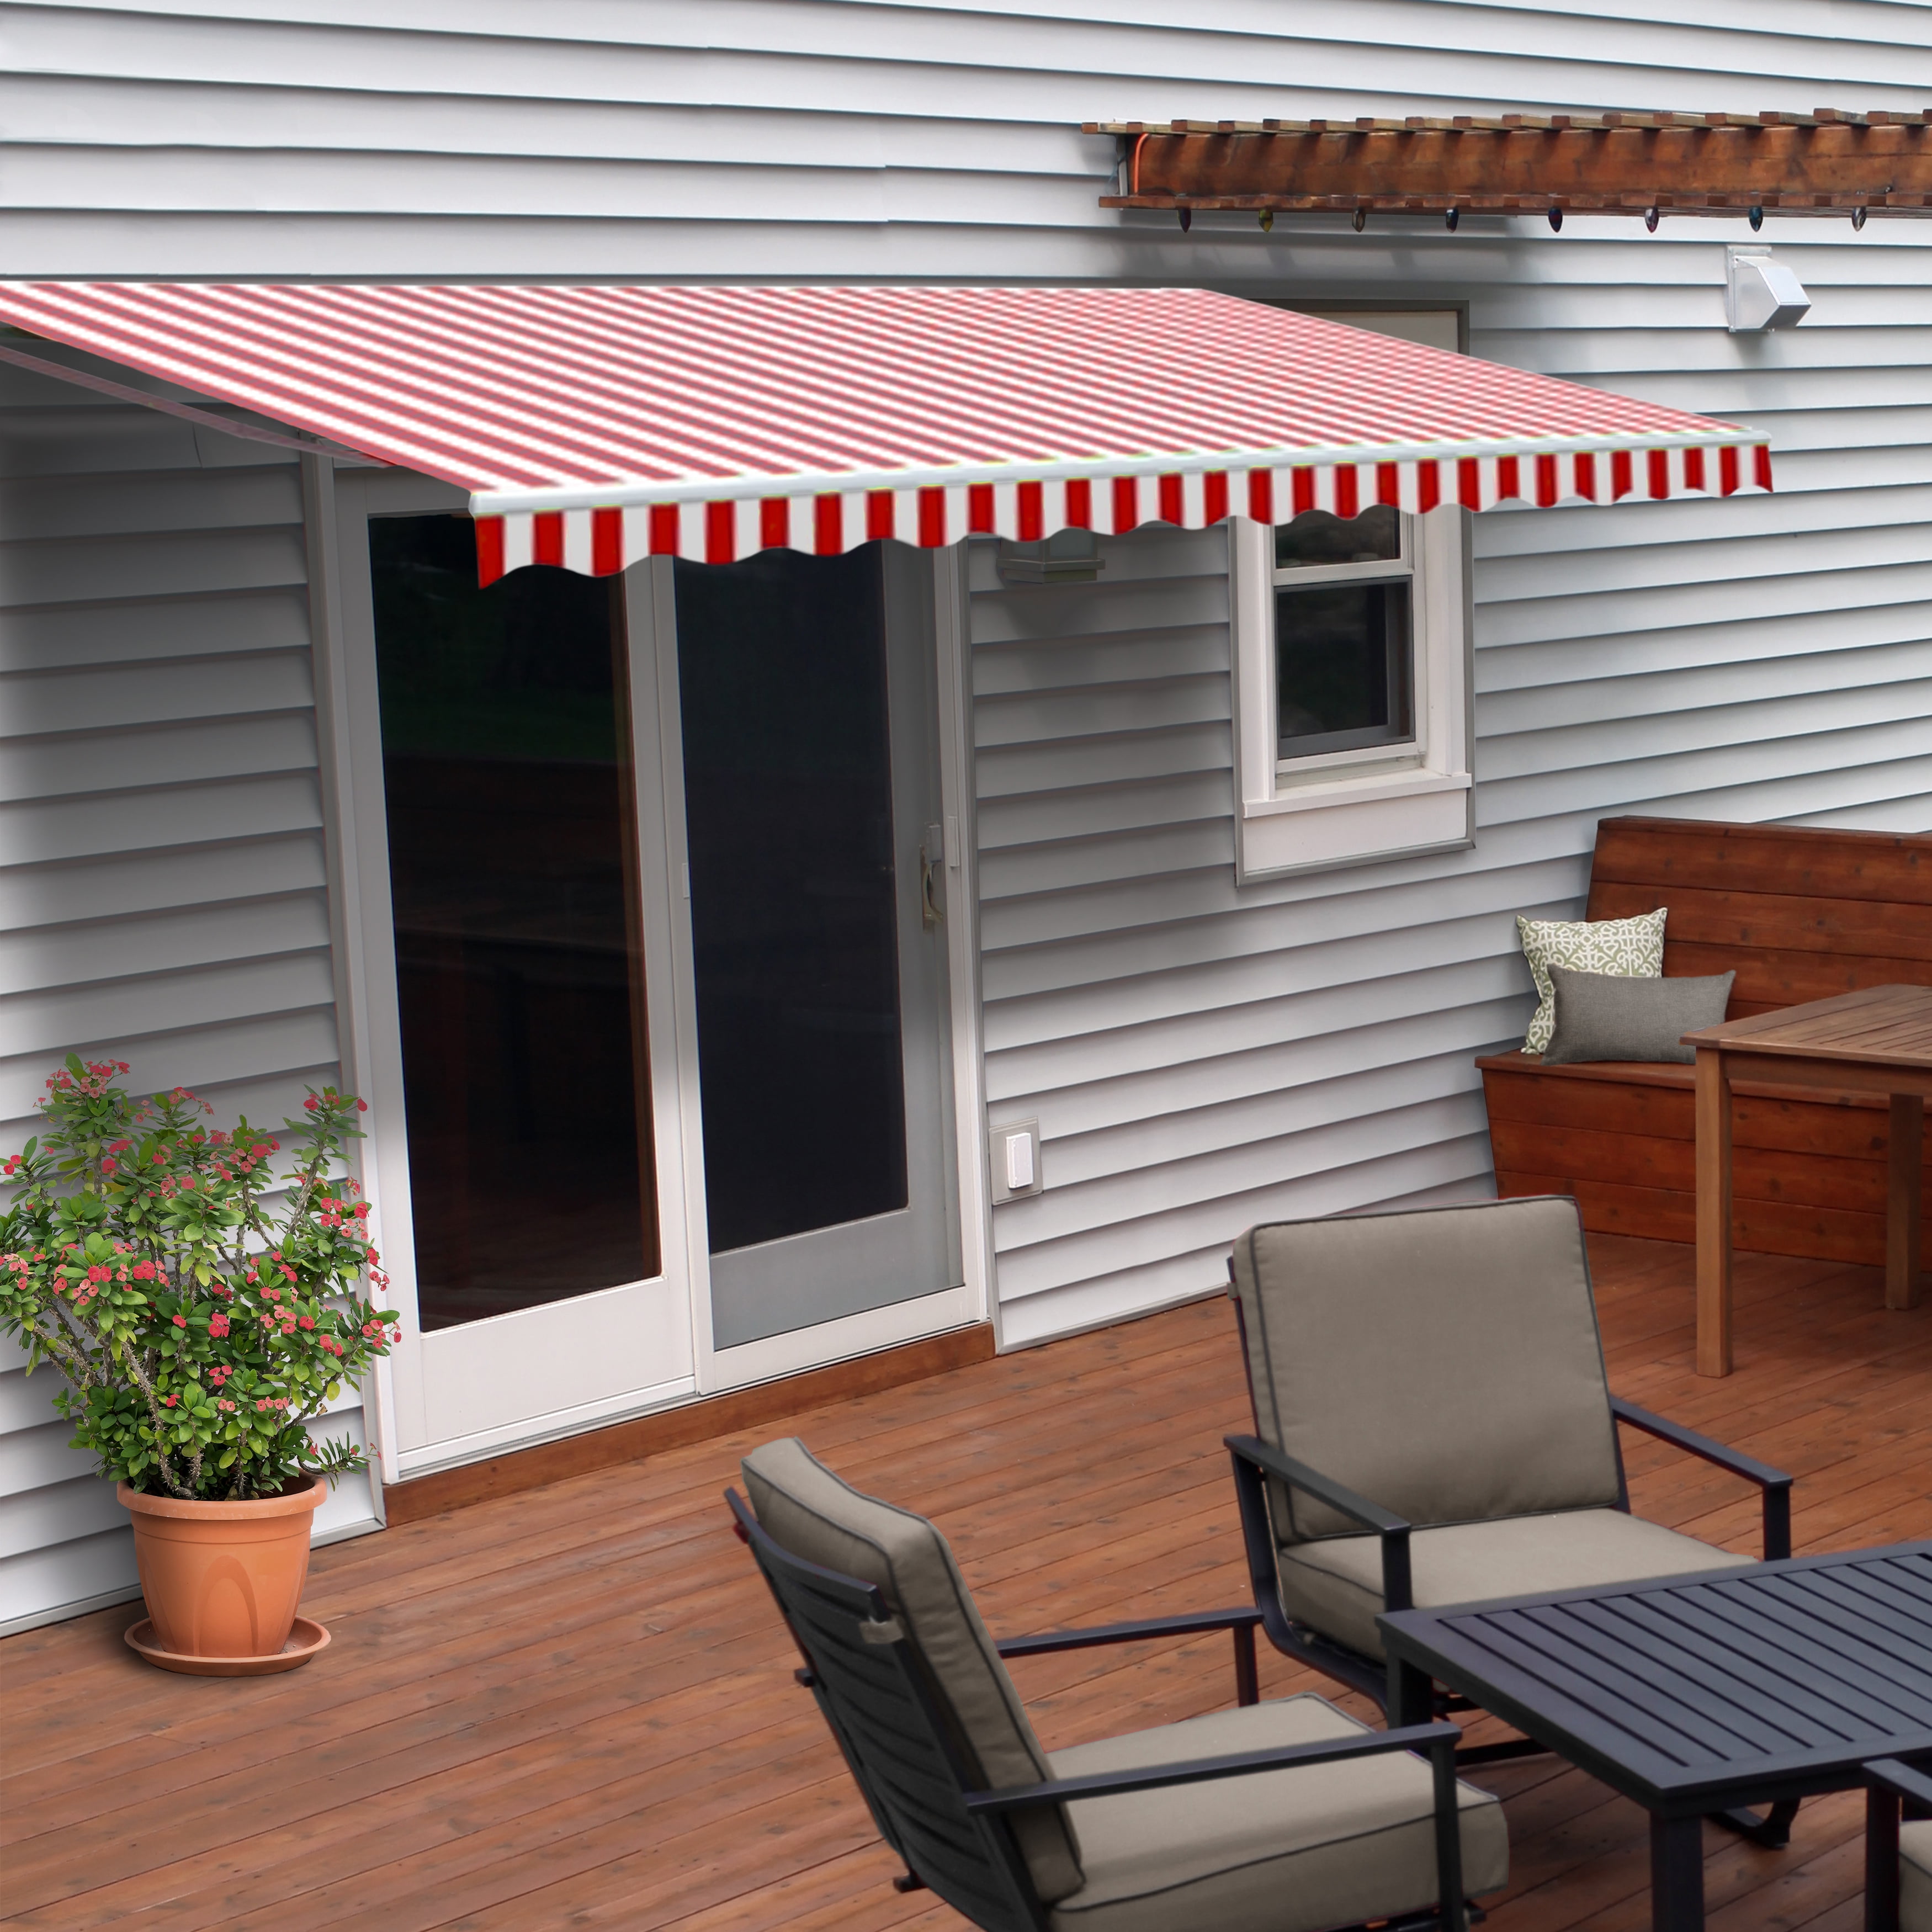 ALEKO Fabric Replacement For 10x8 Ft Retractable Awning Red and White Color 